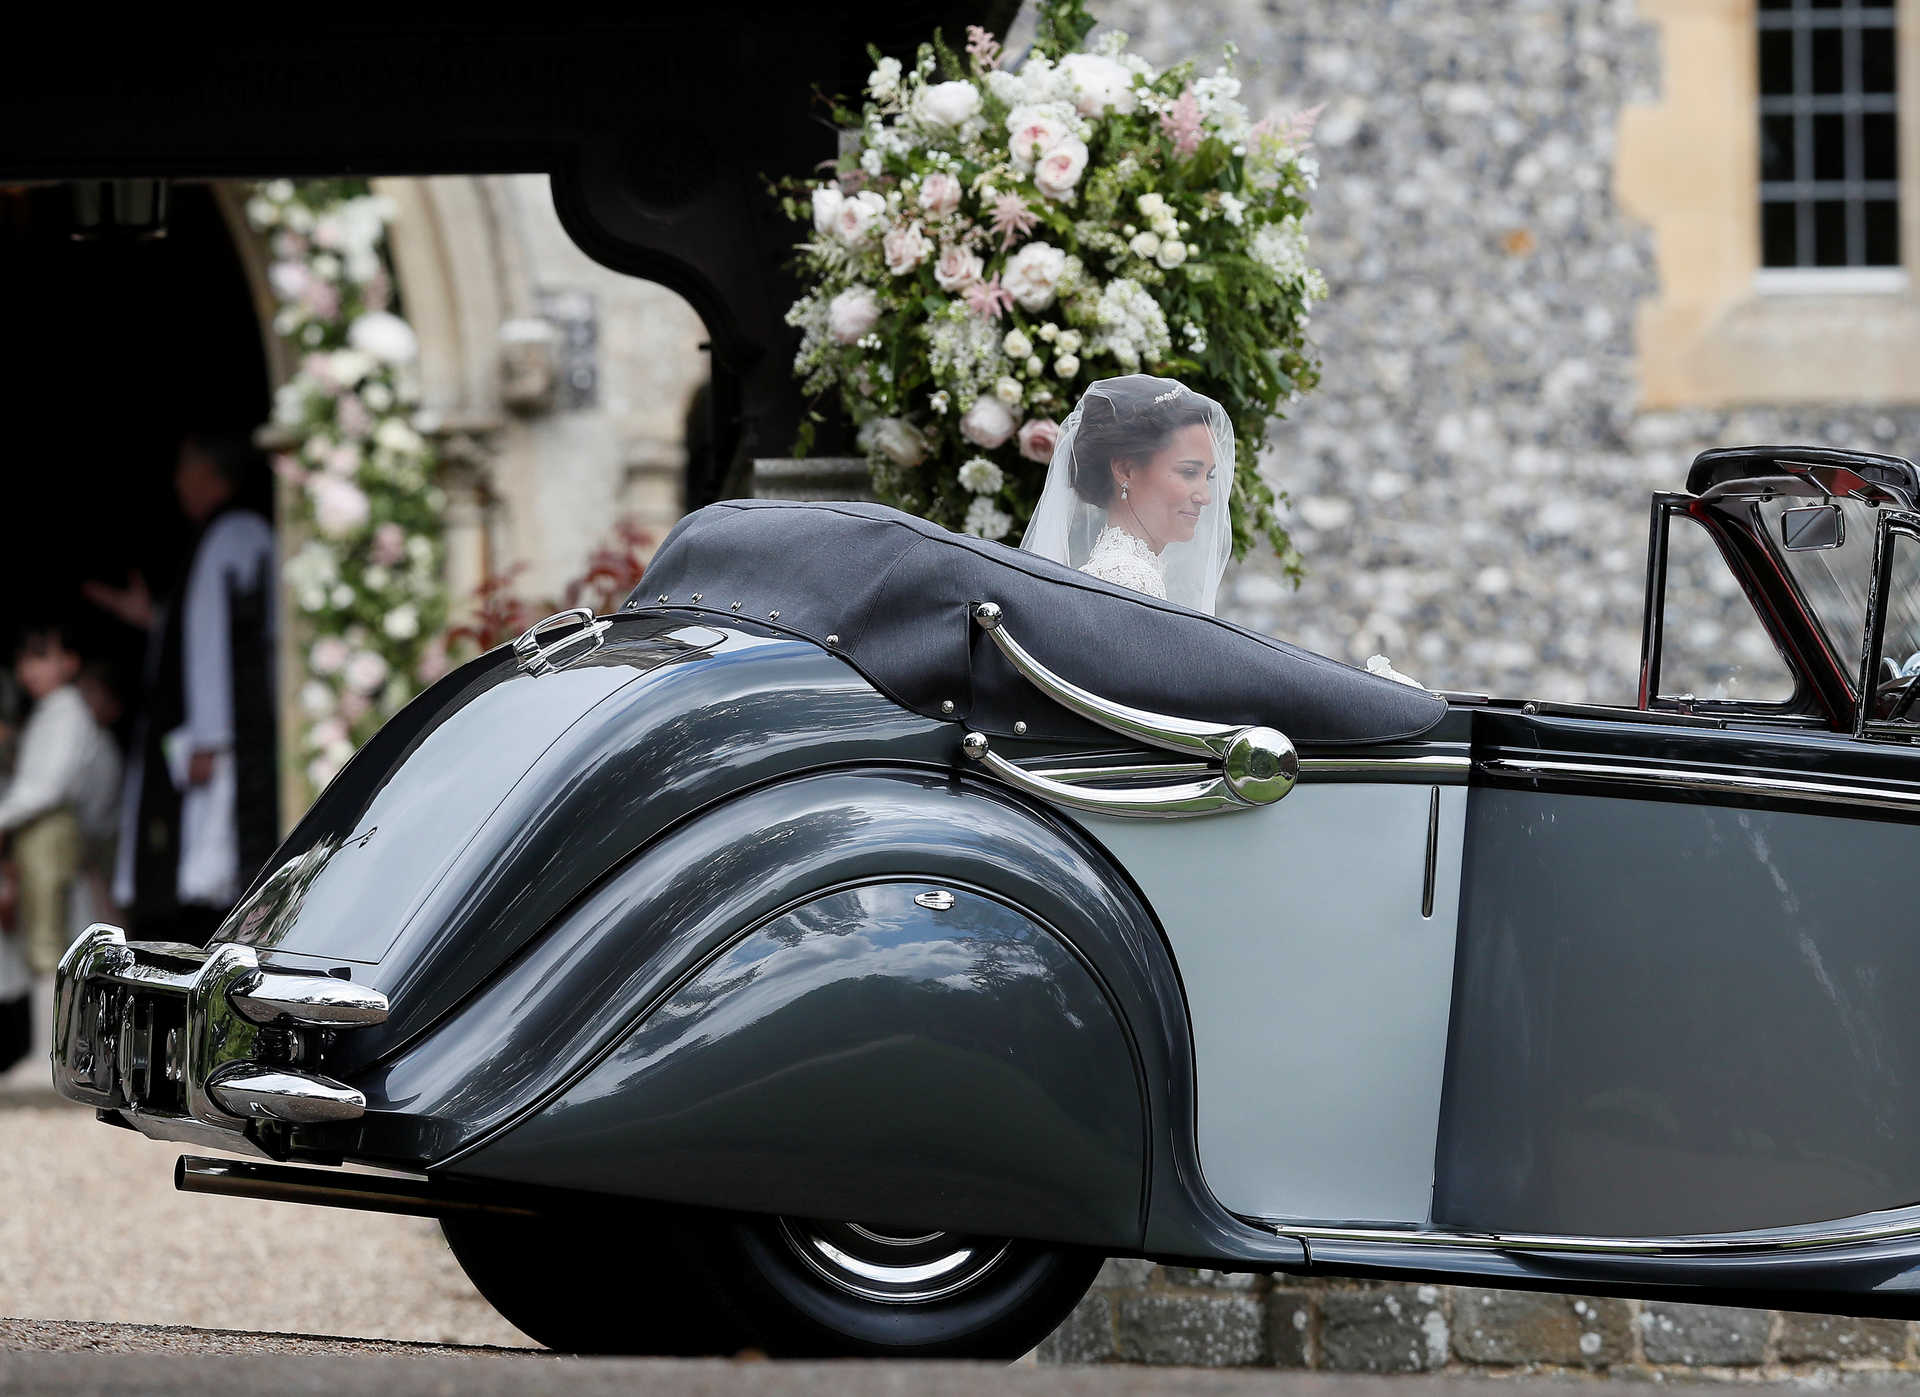 Pippa Middleton, the sister of Britain’s Catherine, Duchess of Cambridge, arrives for her wedding to James Matthews at St Mark’s Church in Englefield, west of London